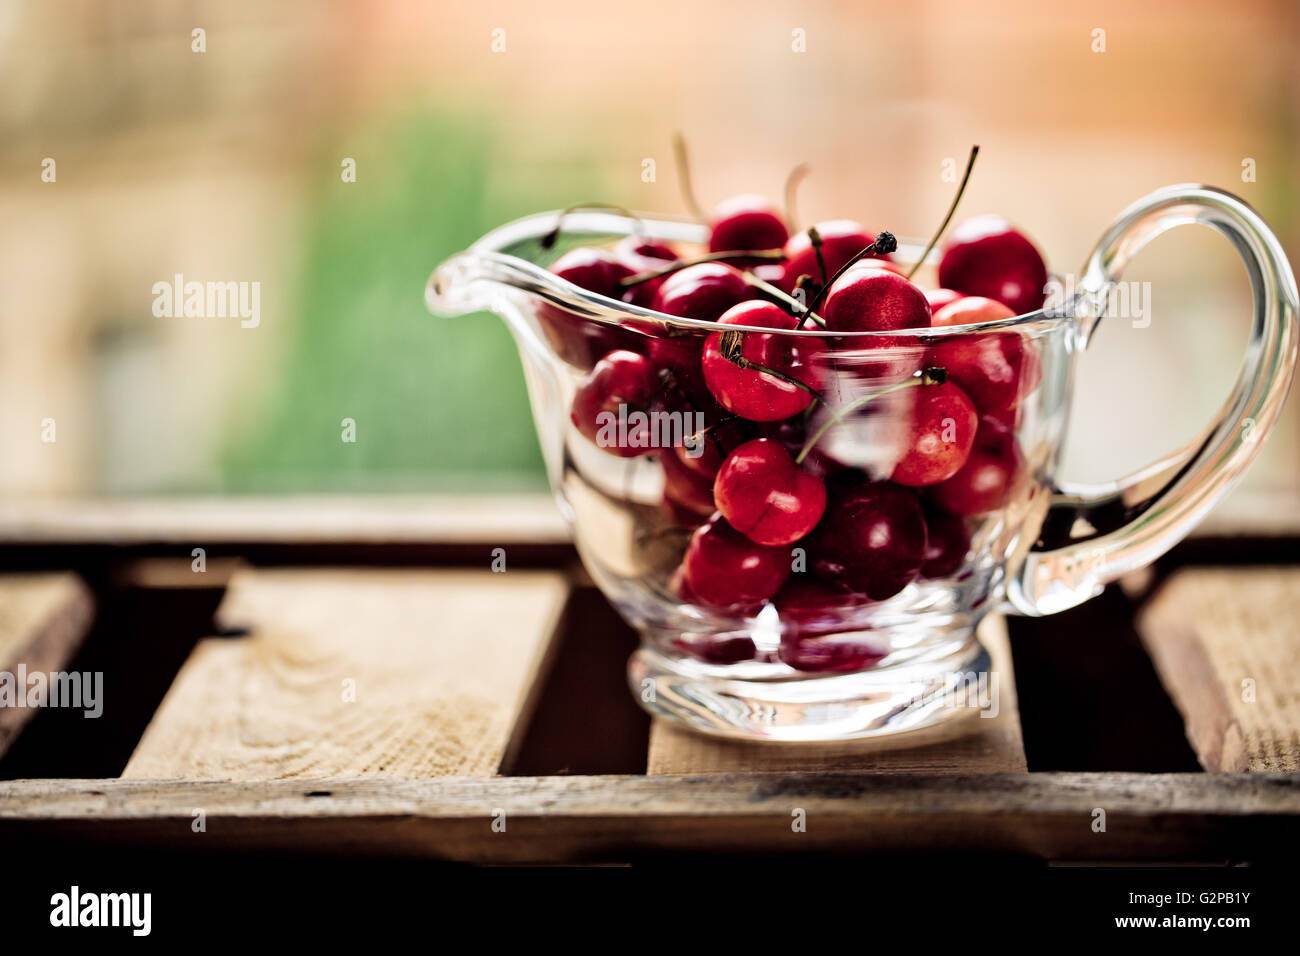 Cherries in Glass Bowl in front of Window Stock Photo